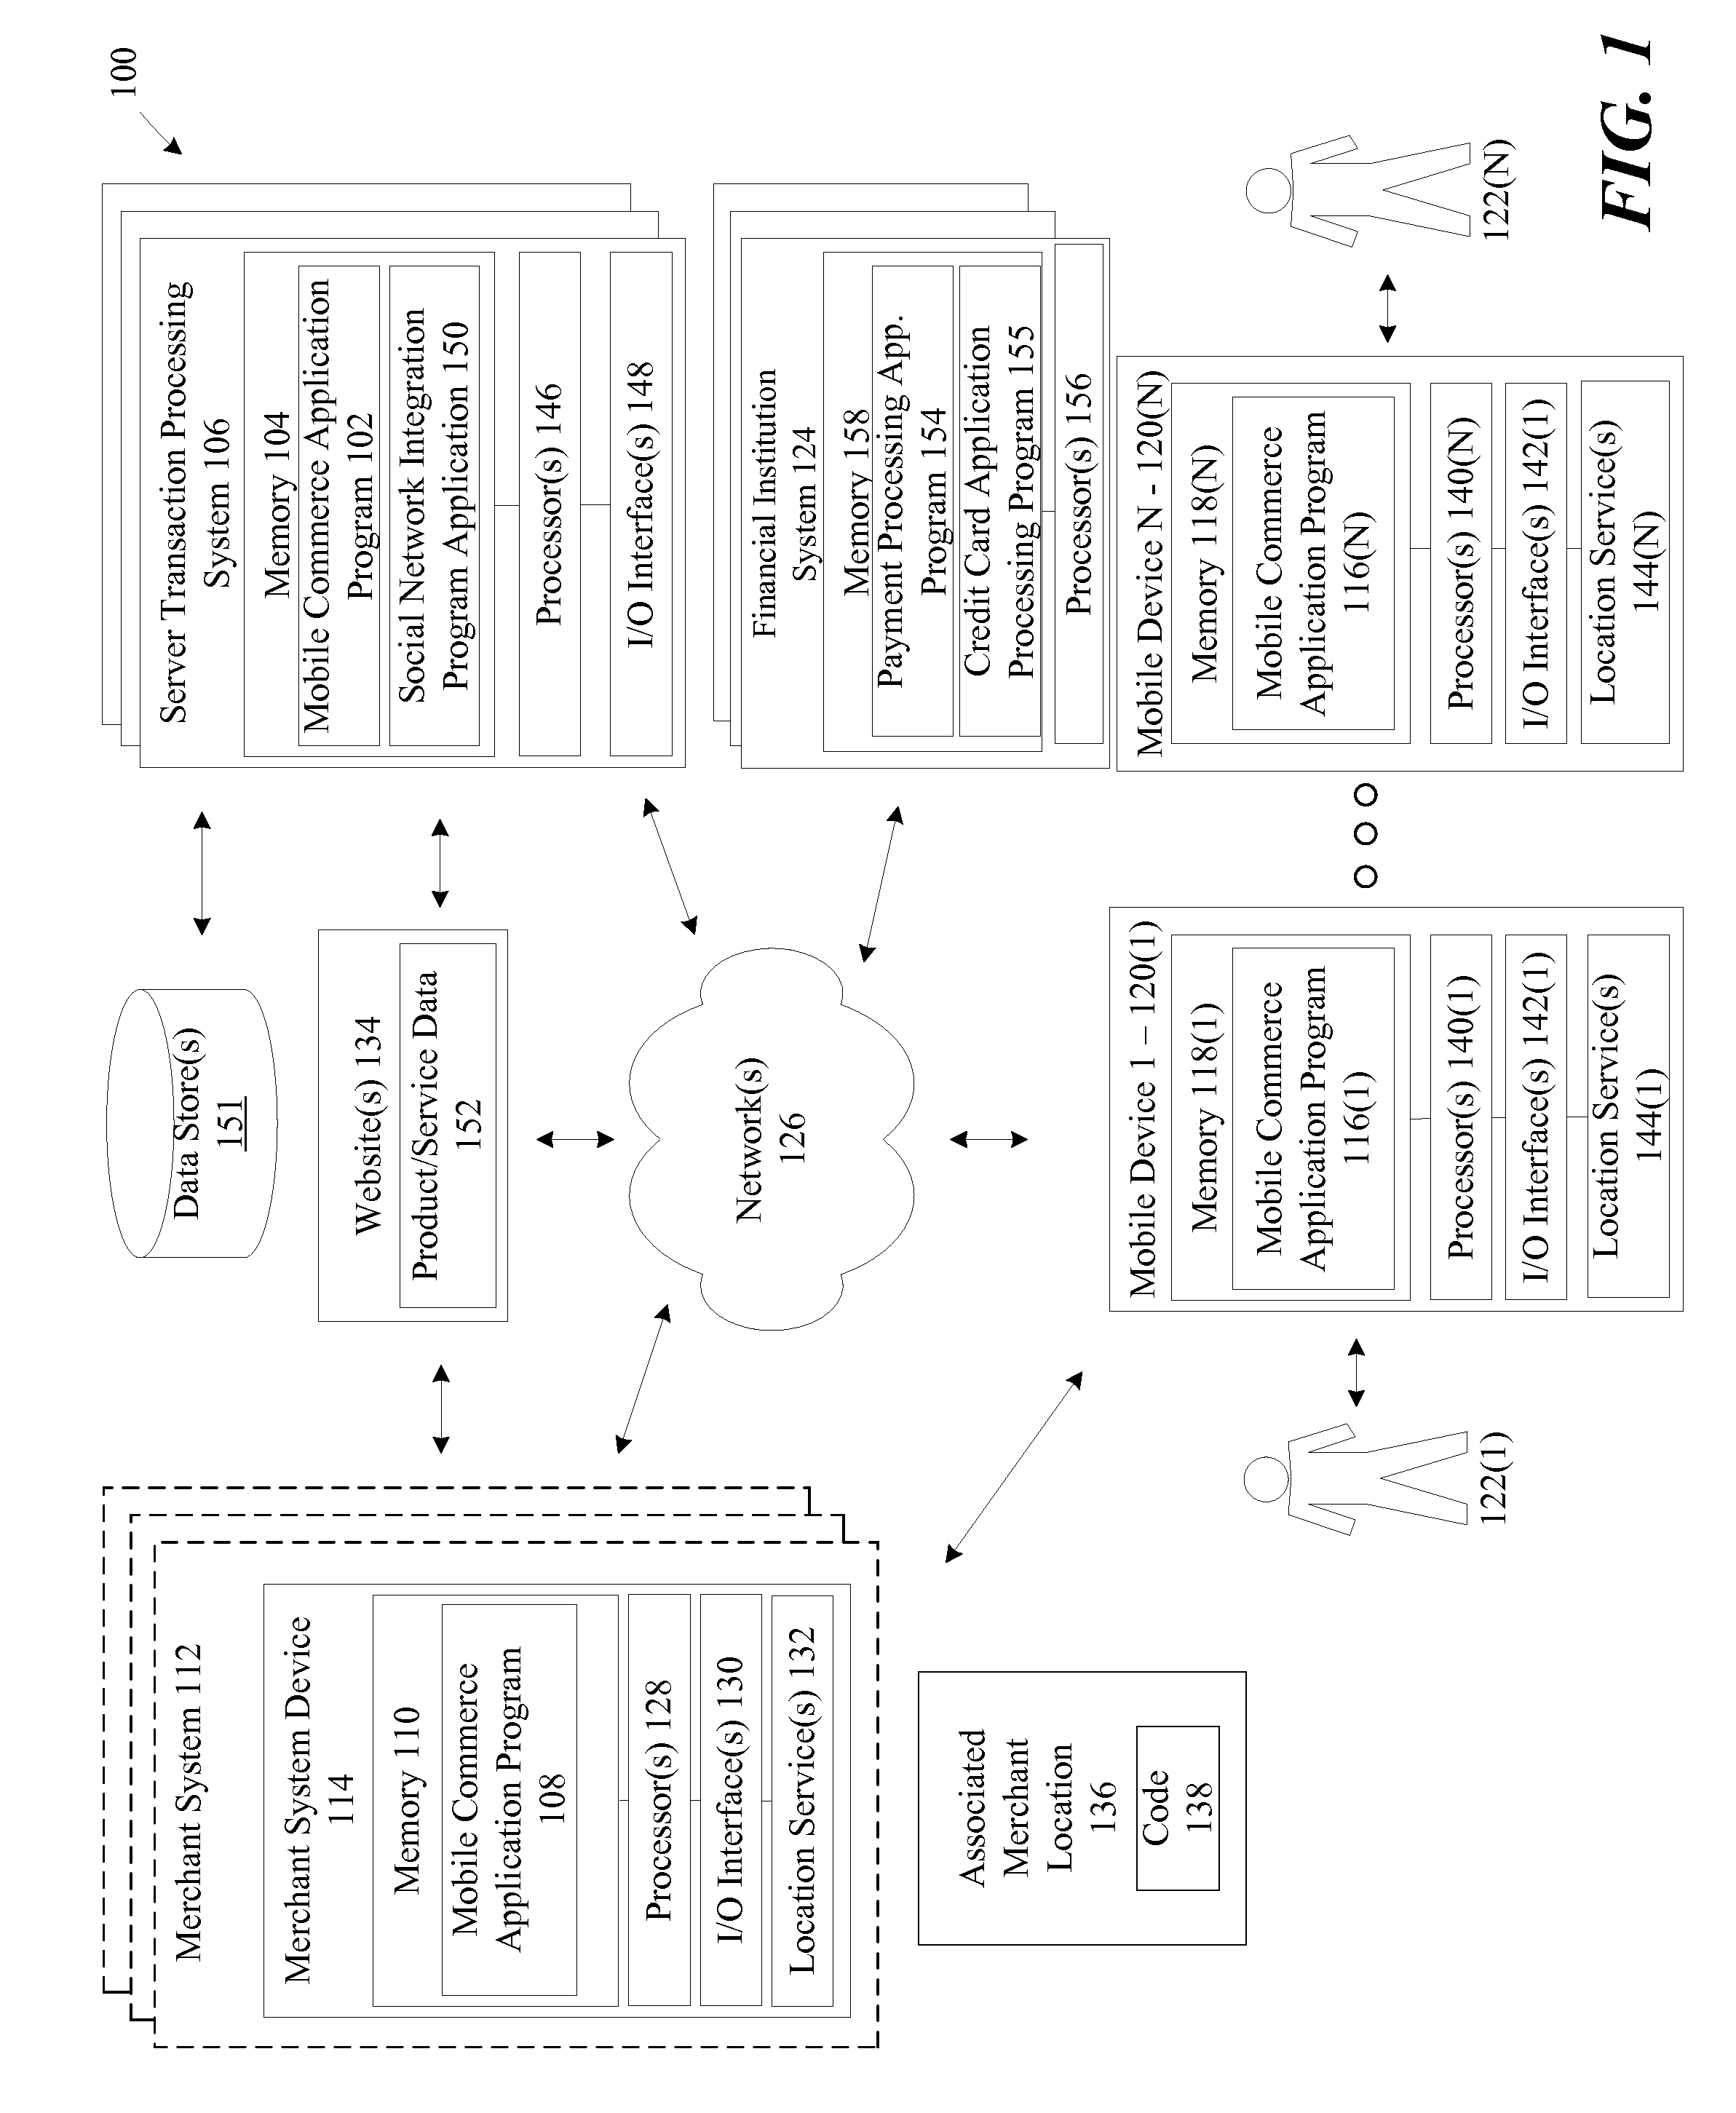 Systems and methods for facilitating the approval and use of a credit account via mobile commerce